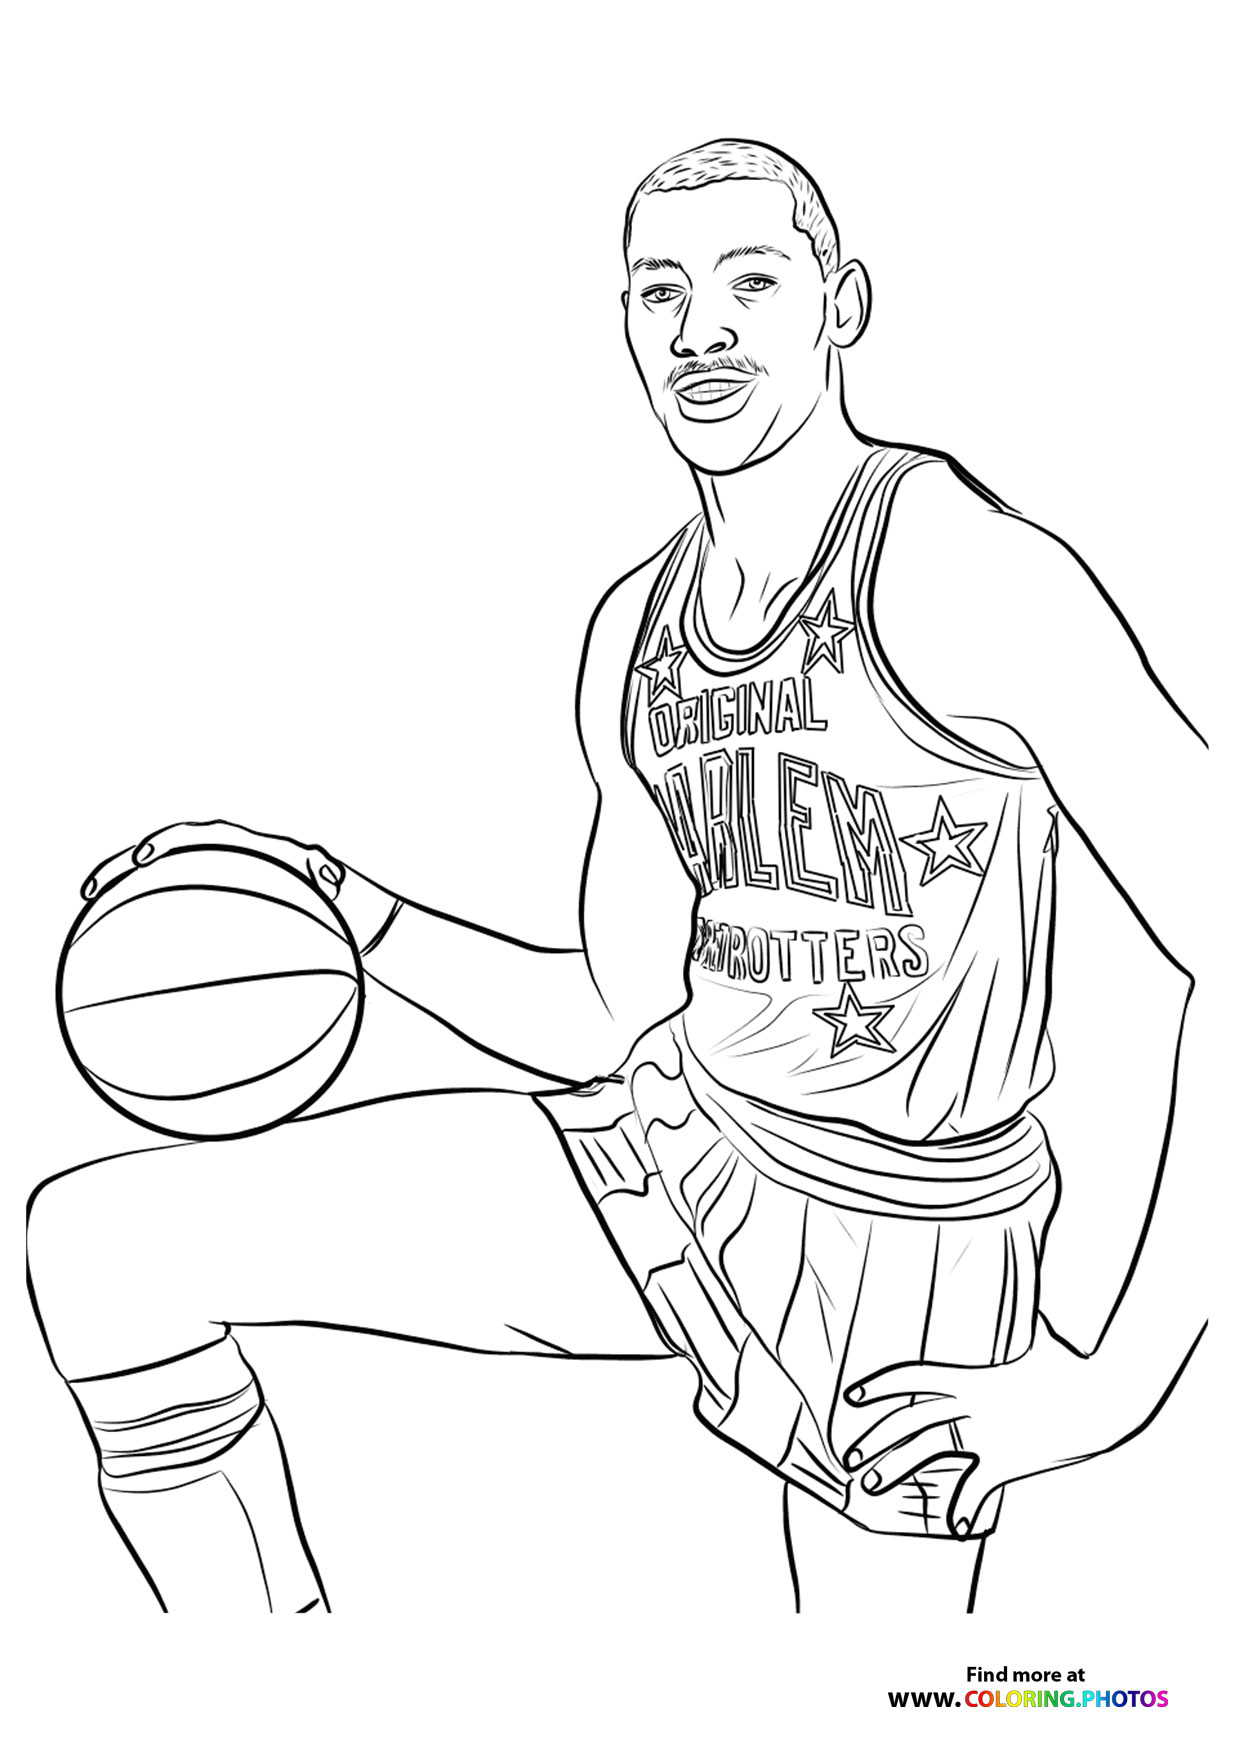 wilt chamberlain - Coloring Pages for kids